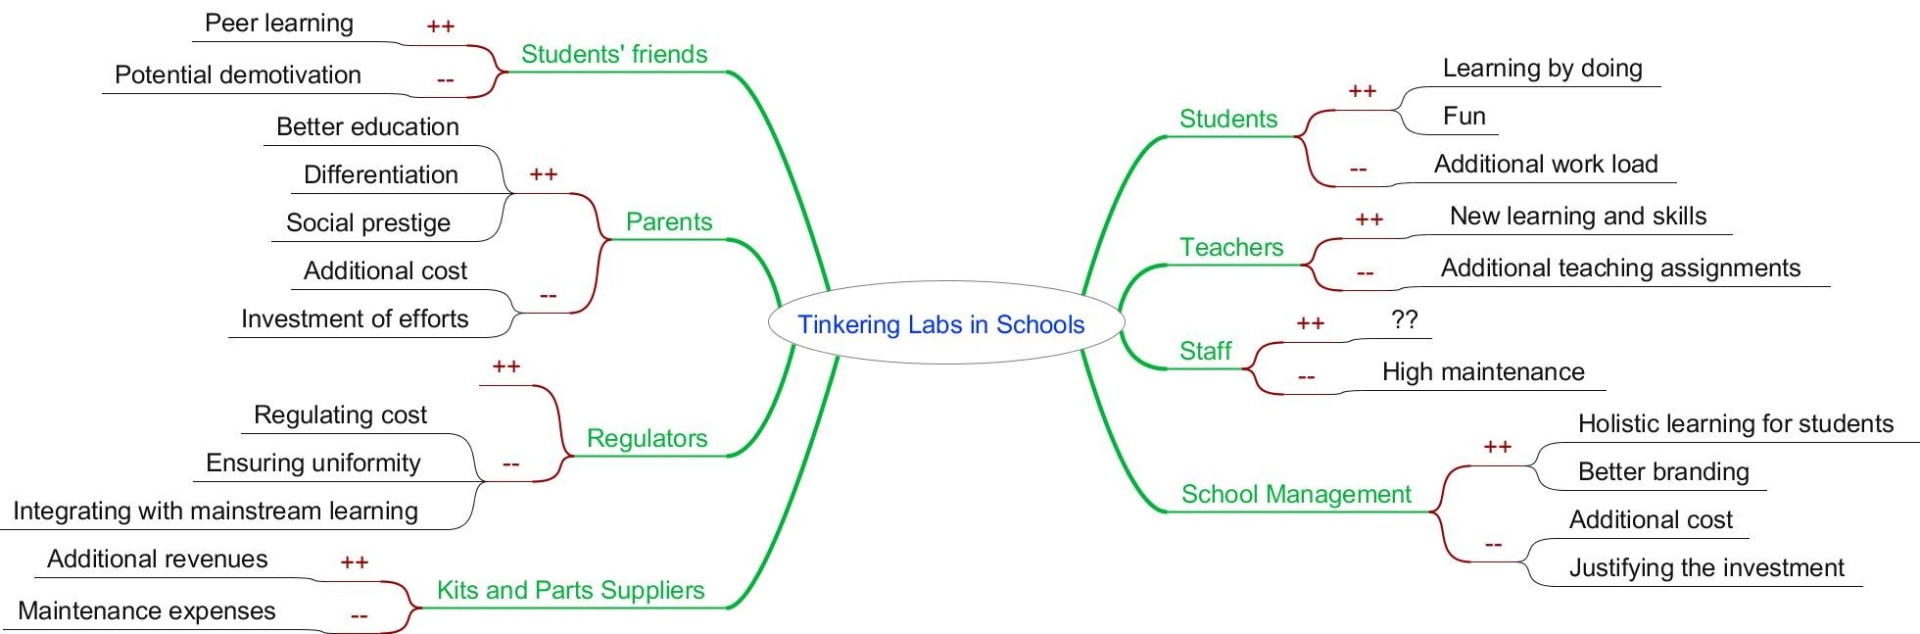 Stakeholder_Map_for_Tinkering_Labs_in_Schools.jpeg